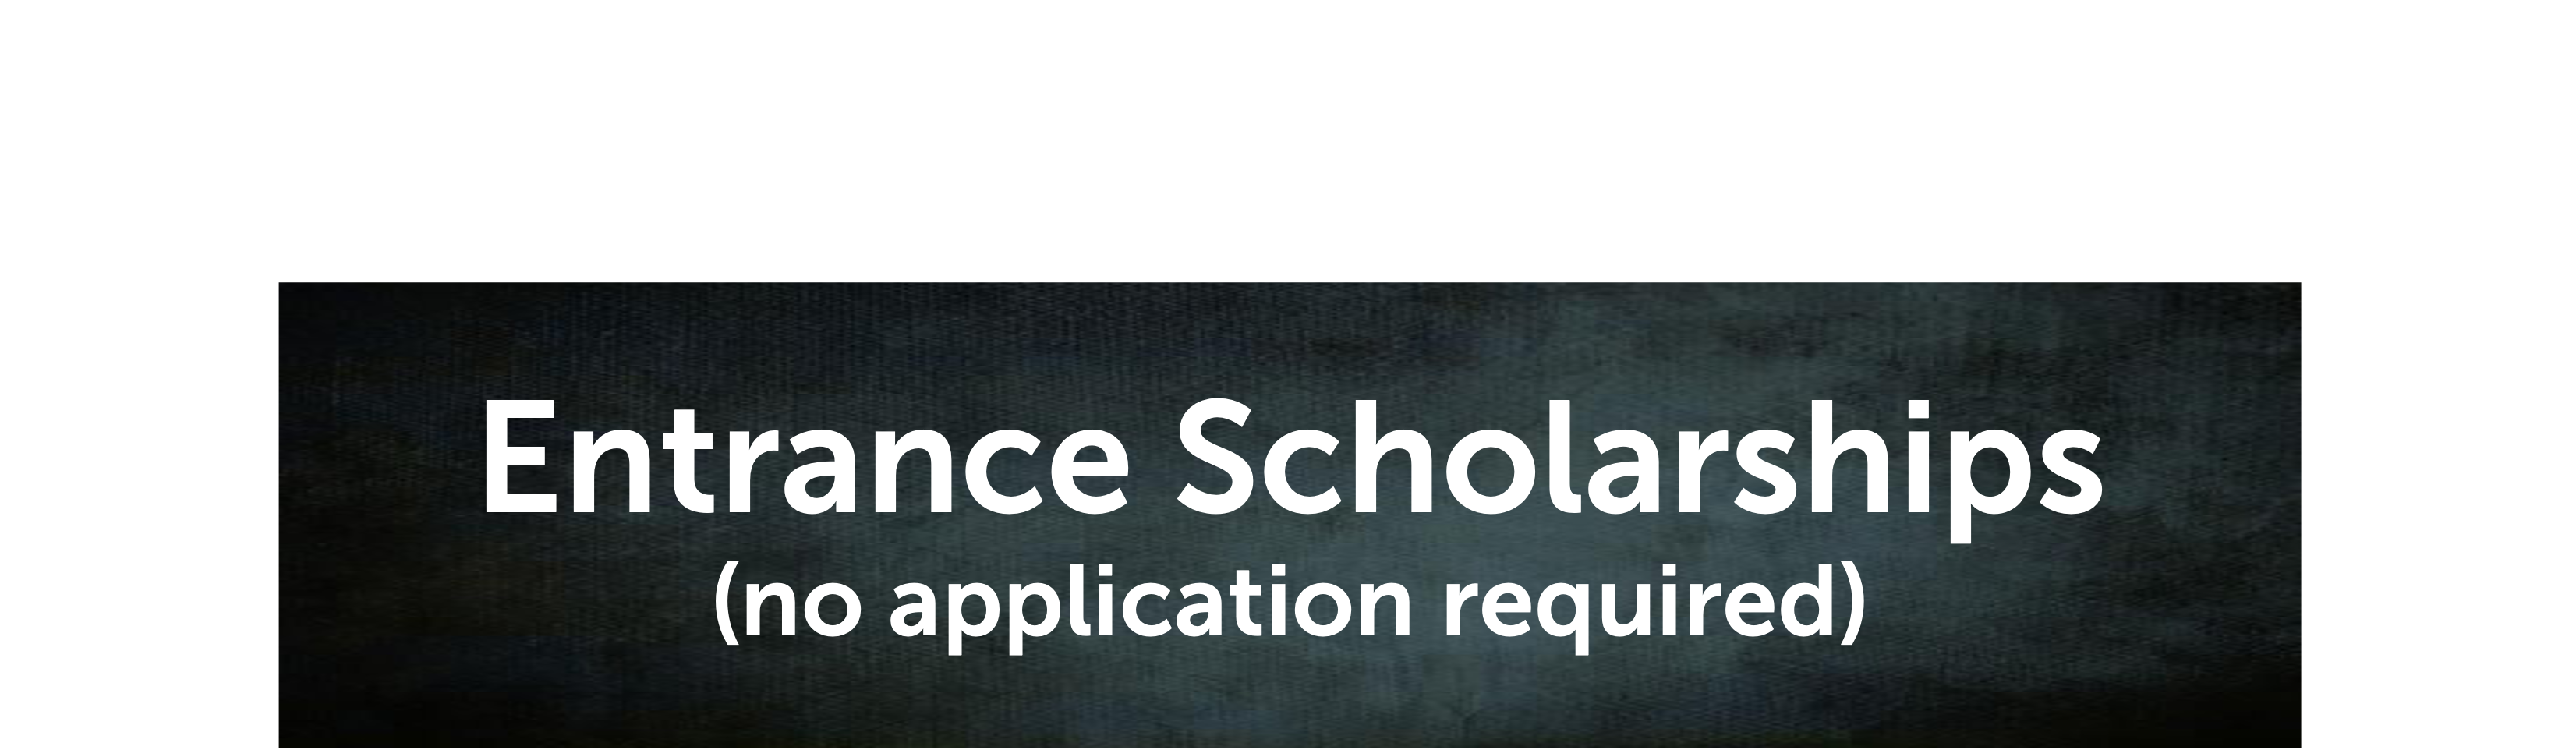 Entrance Scholarships (no application required)